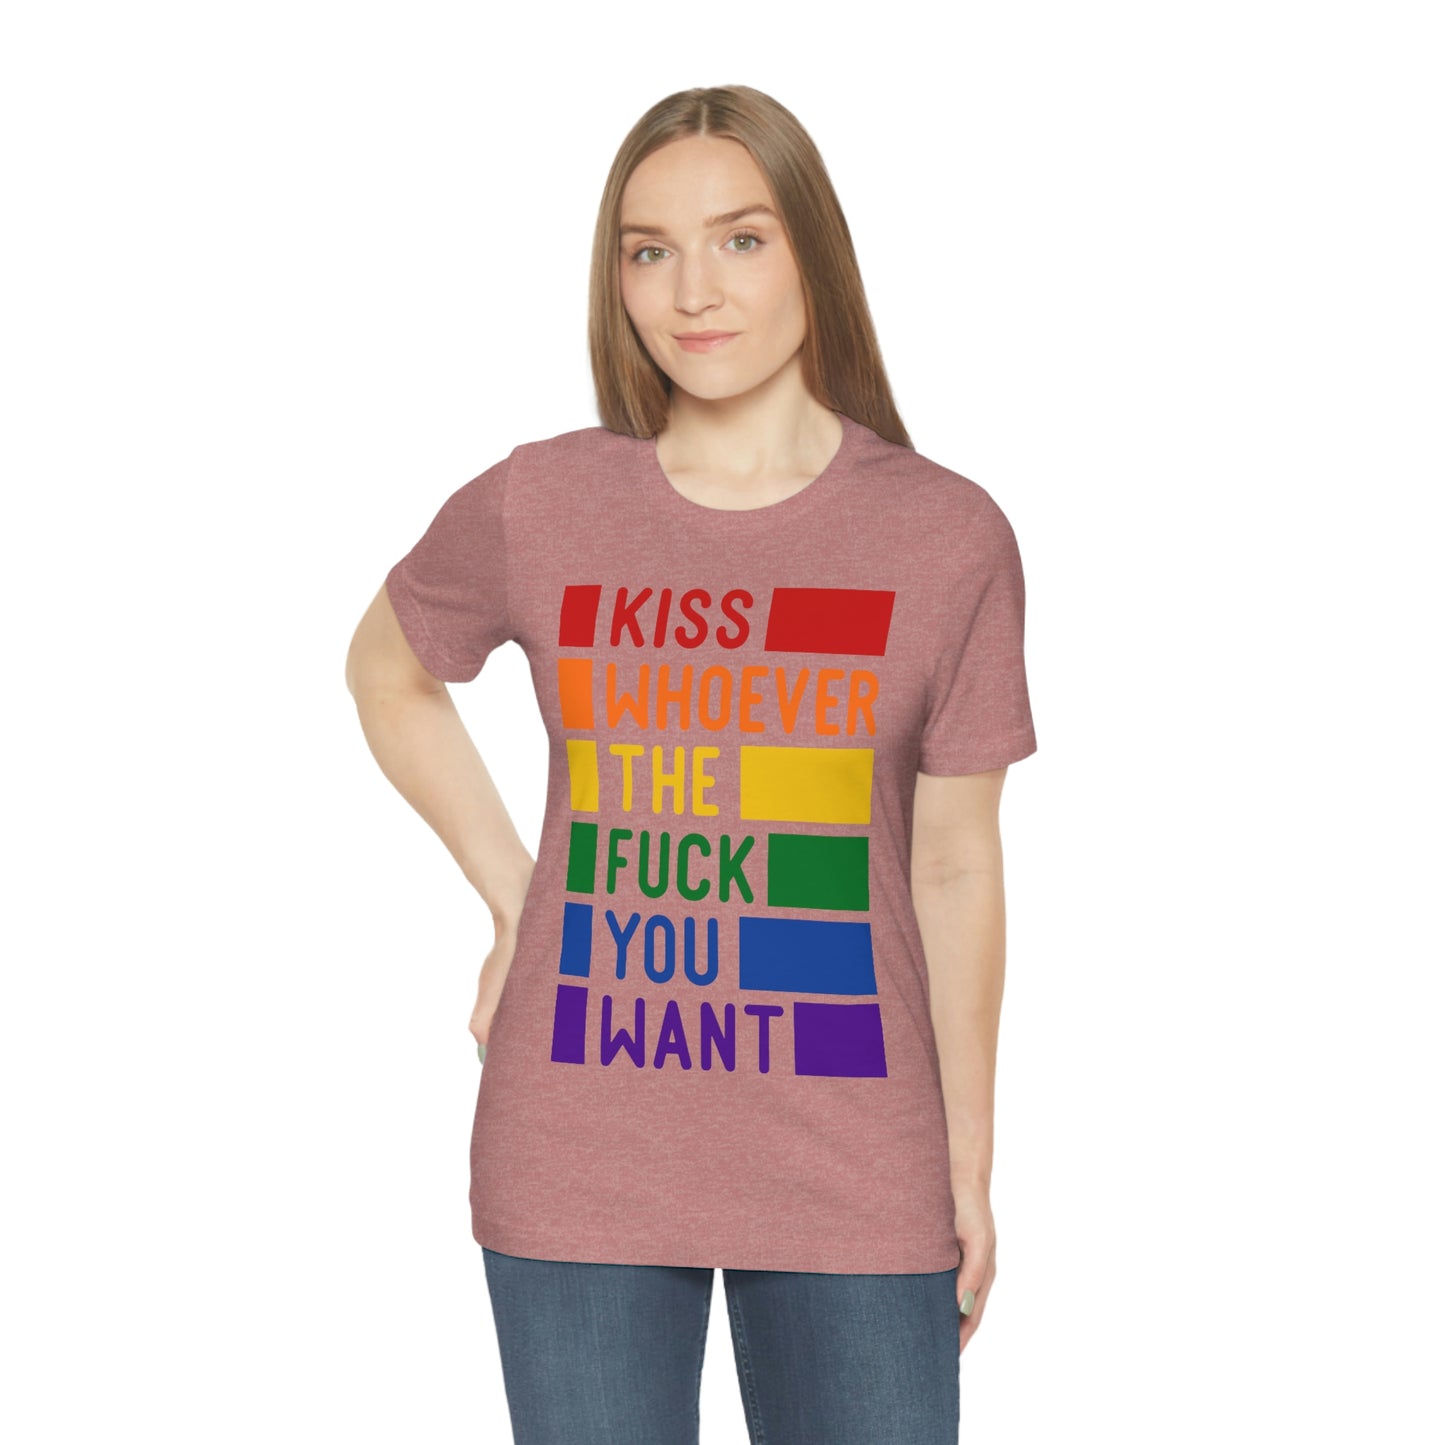 Pride: Kiss Whoever the Fuck You Want - Jersey Short Sleeve Unisex Tee